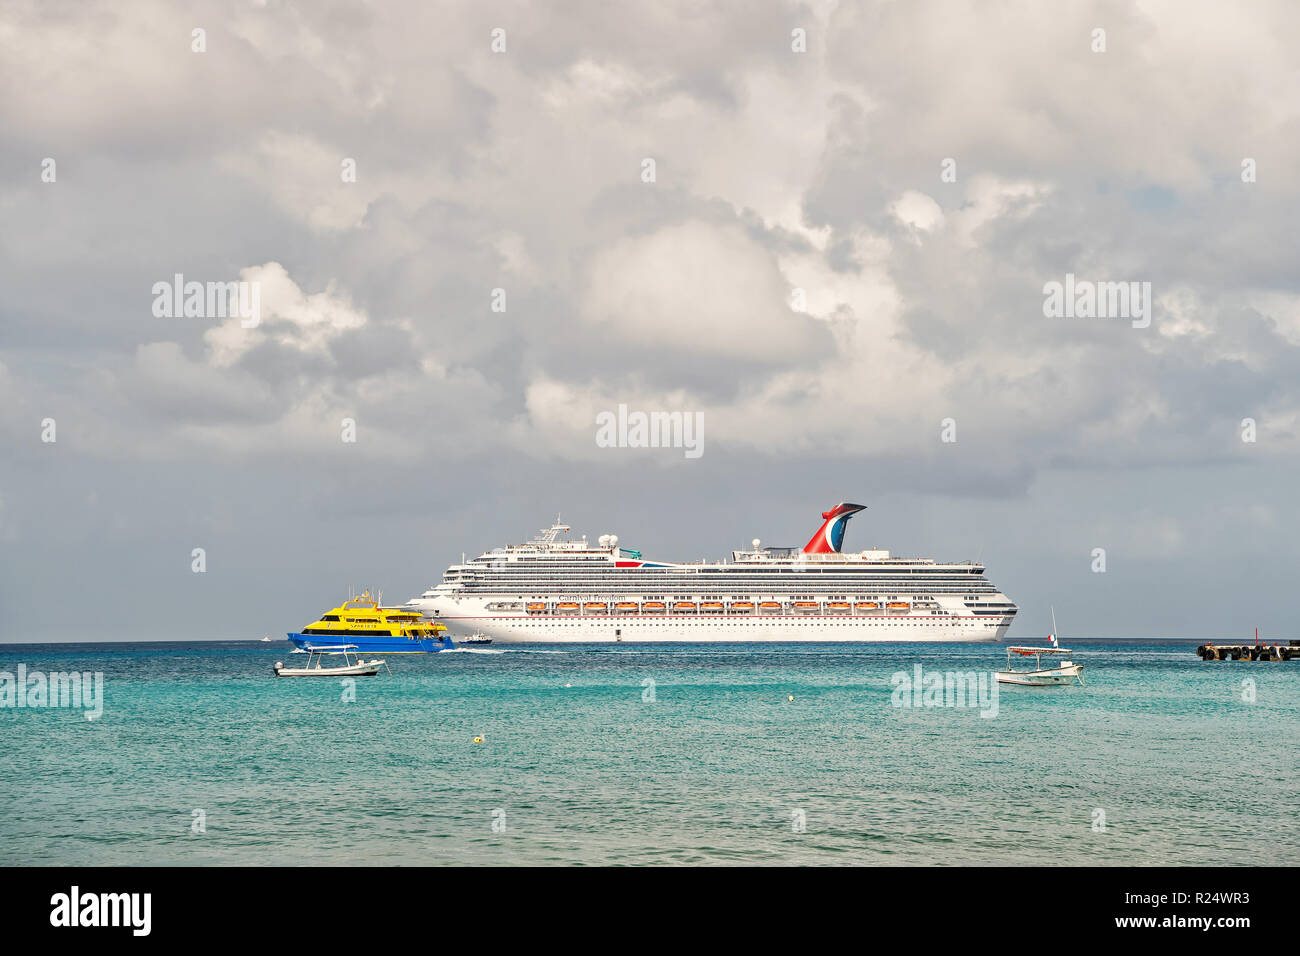 Cozumel, Mexico - December 24, 2015: large cruise ship or liner in bay or harbor, touristic passenger boat on water summer day on cloudy sky background with yachts and boats. traveling and vacation Stock Photo